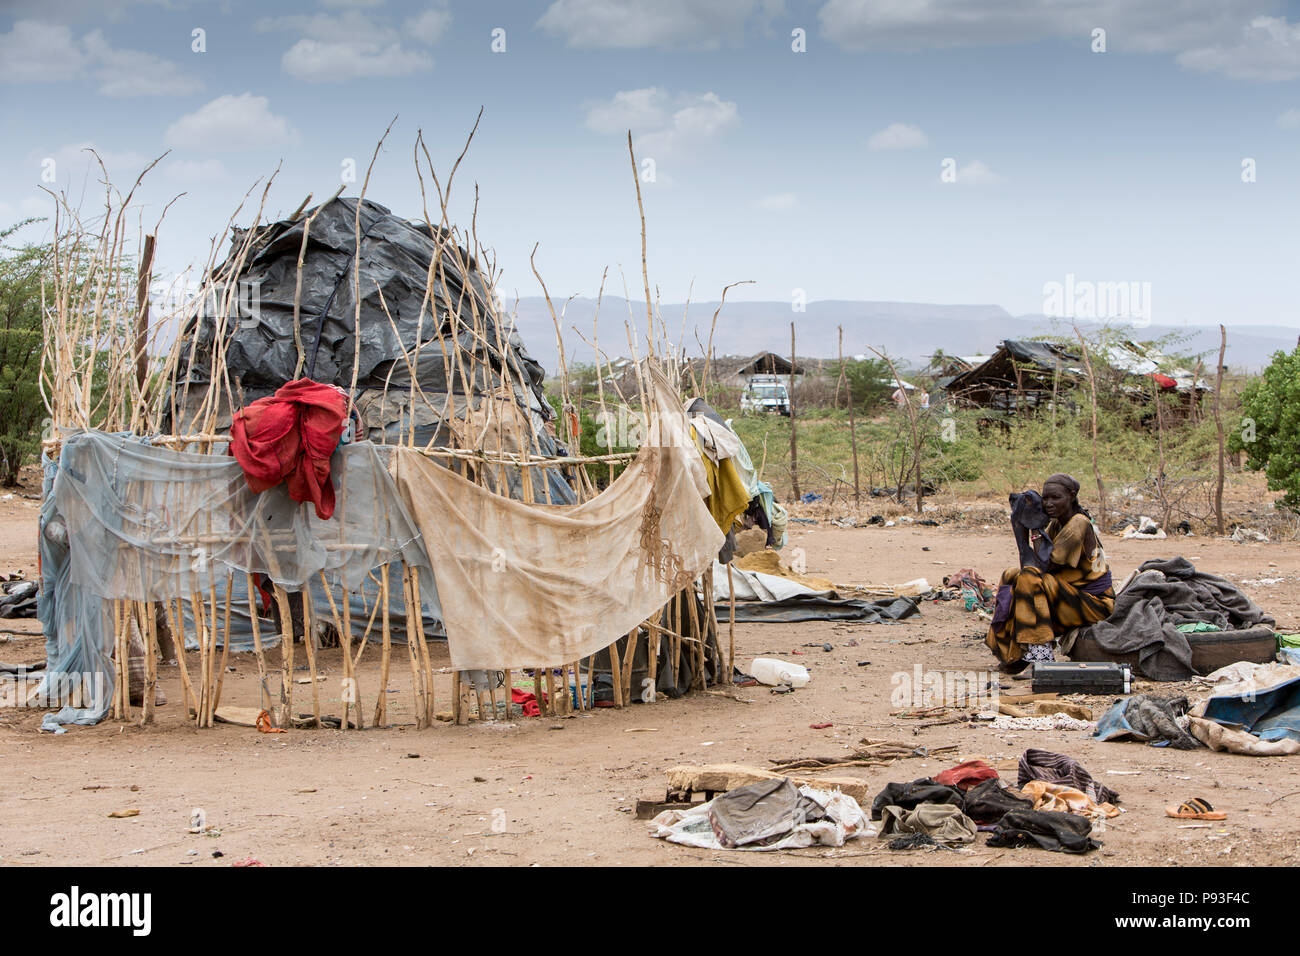 Kakuma, Kenya - On the edge of the refugee camp Kakuma. A woman is lost in front of her hut, covered with old plastic tarpaulins. Stock Photo